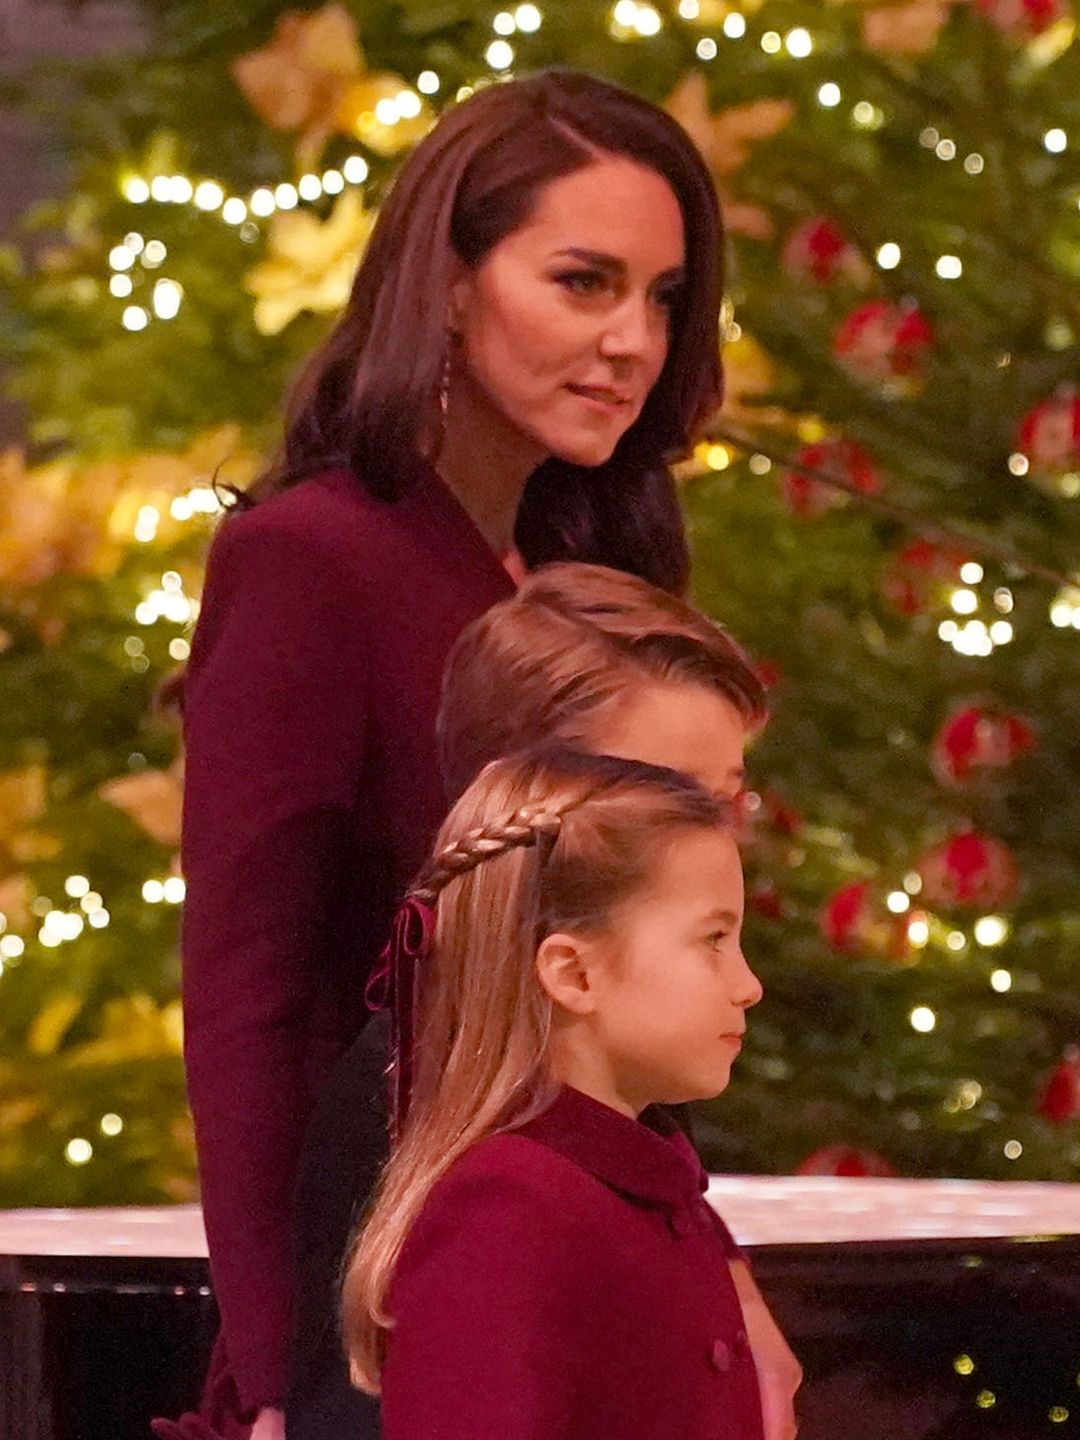 The young royals get to decorate their own Christmas tree at Carole Middleton's home